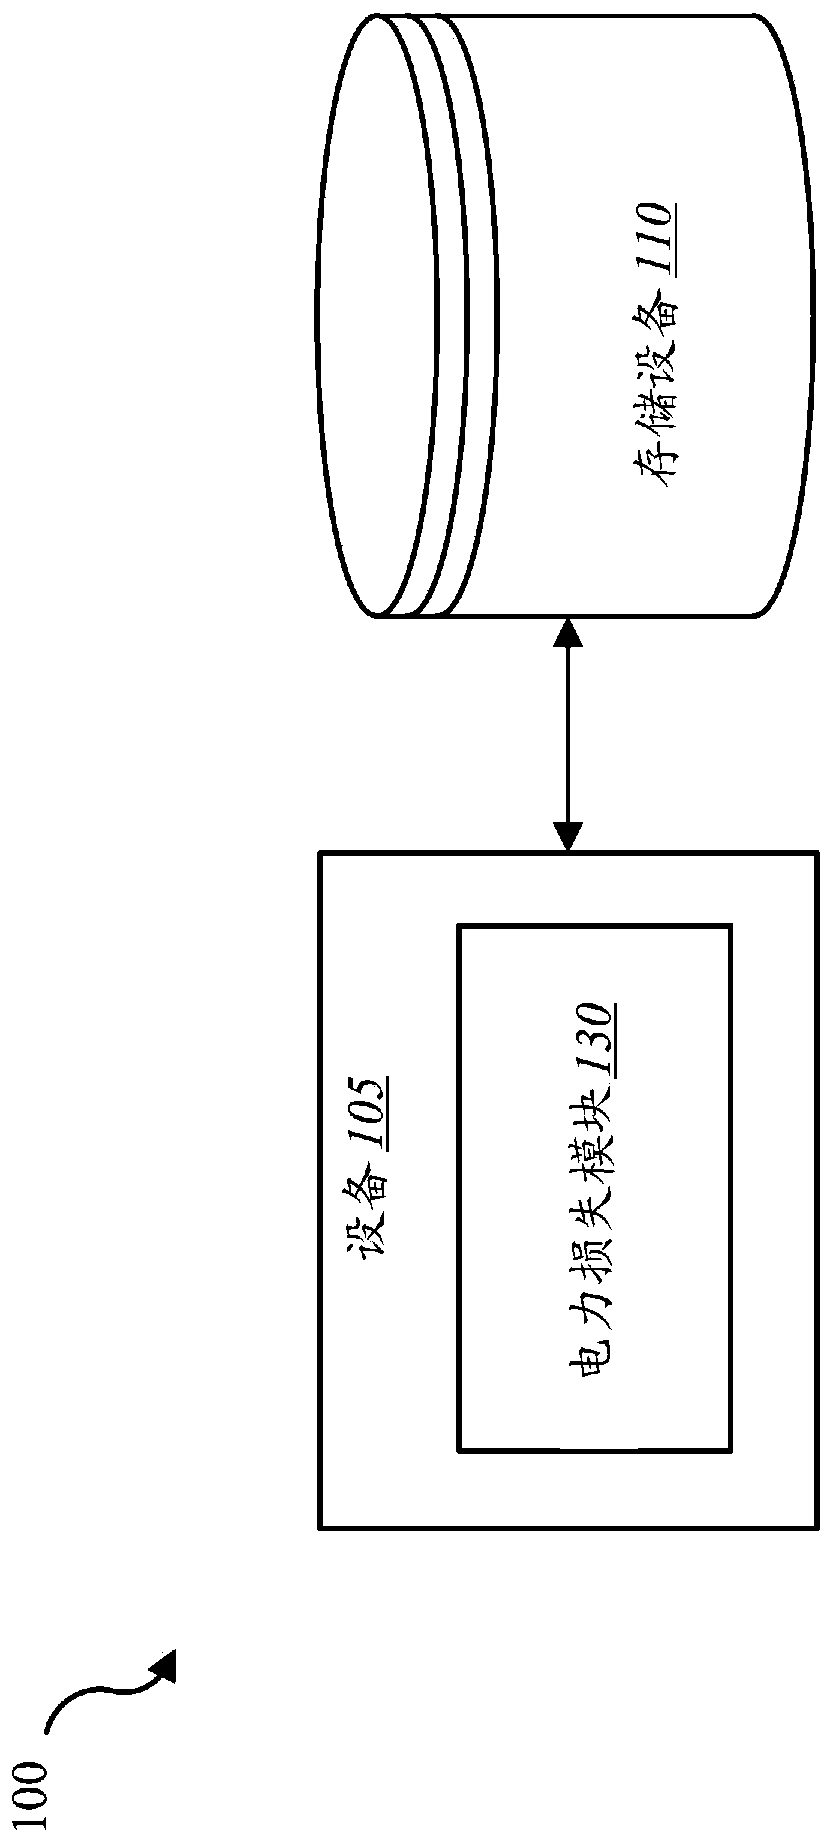 Method and system for saving critical data in the event of power loss